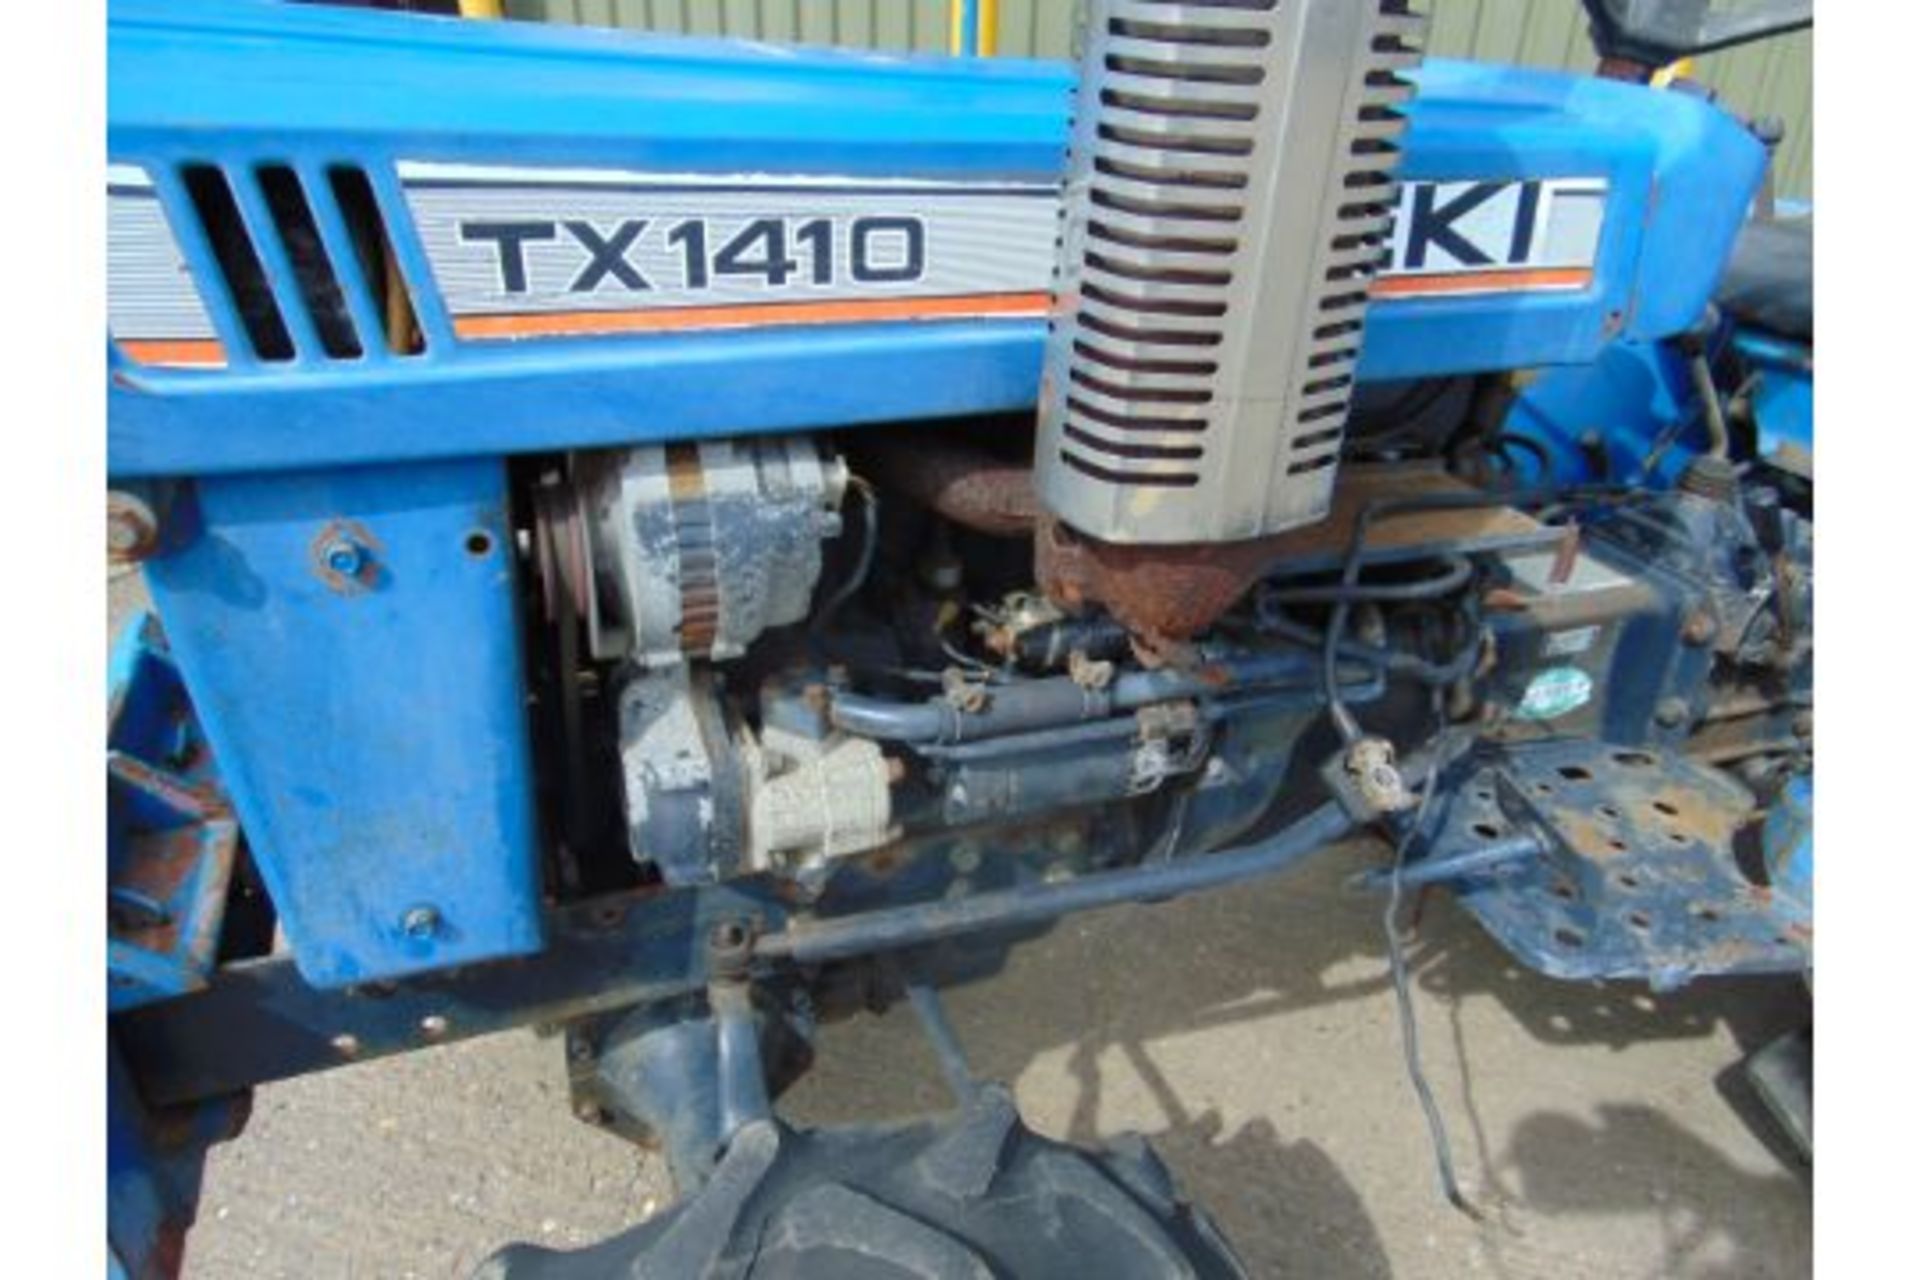 Iseki TX1410 4x4 Compact Tractor w/ Rotor Tiller - Image 20 of 24